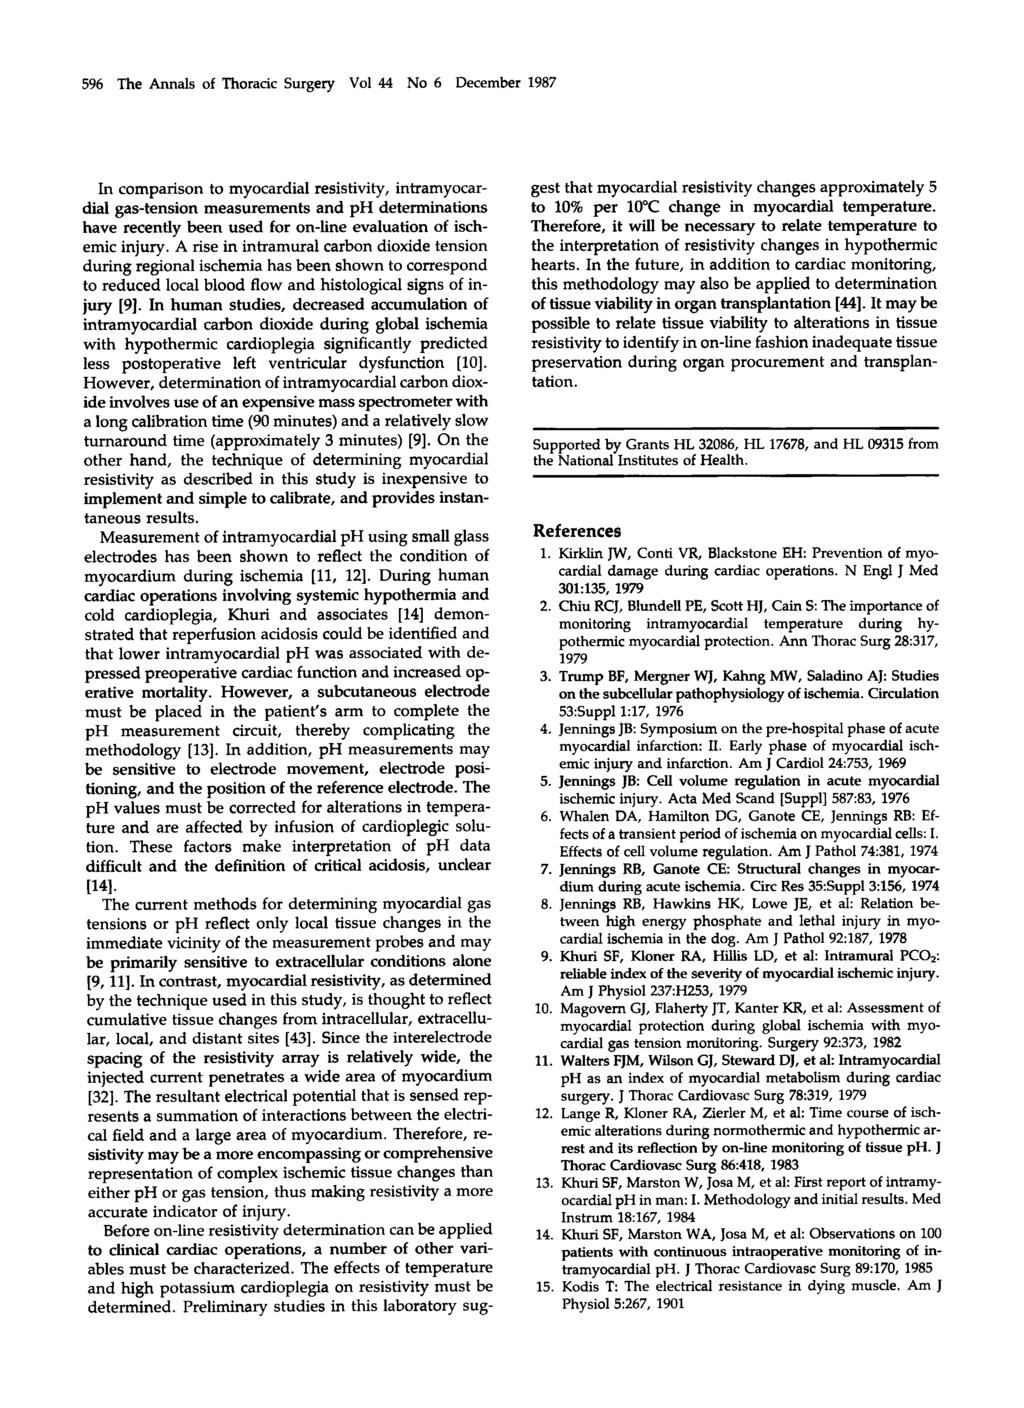 596 The Annals of Thorai Surgery Vol 44 No 6 Deember 1987 n omparison to myoardial resistivity, intramyoardial gastension measurements and ph determinations have reently been used for online